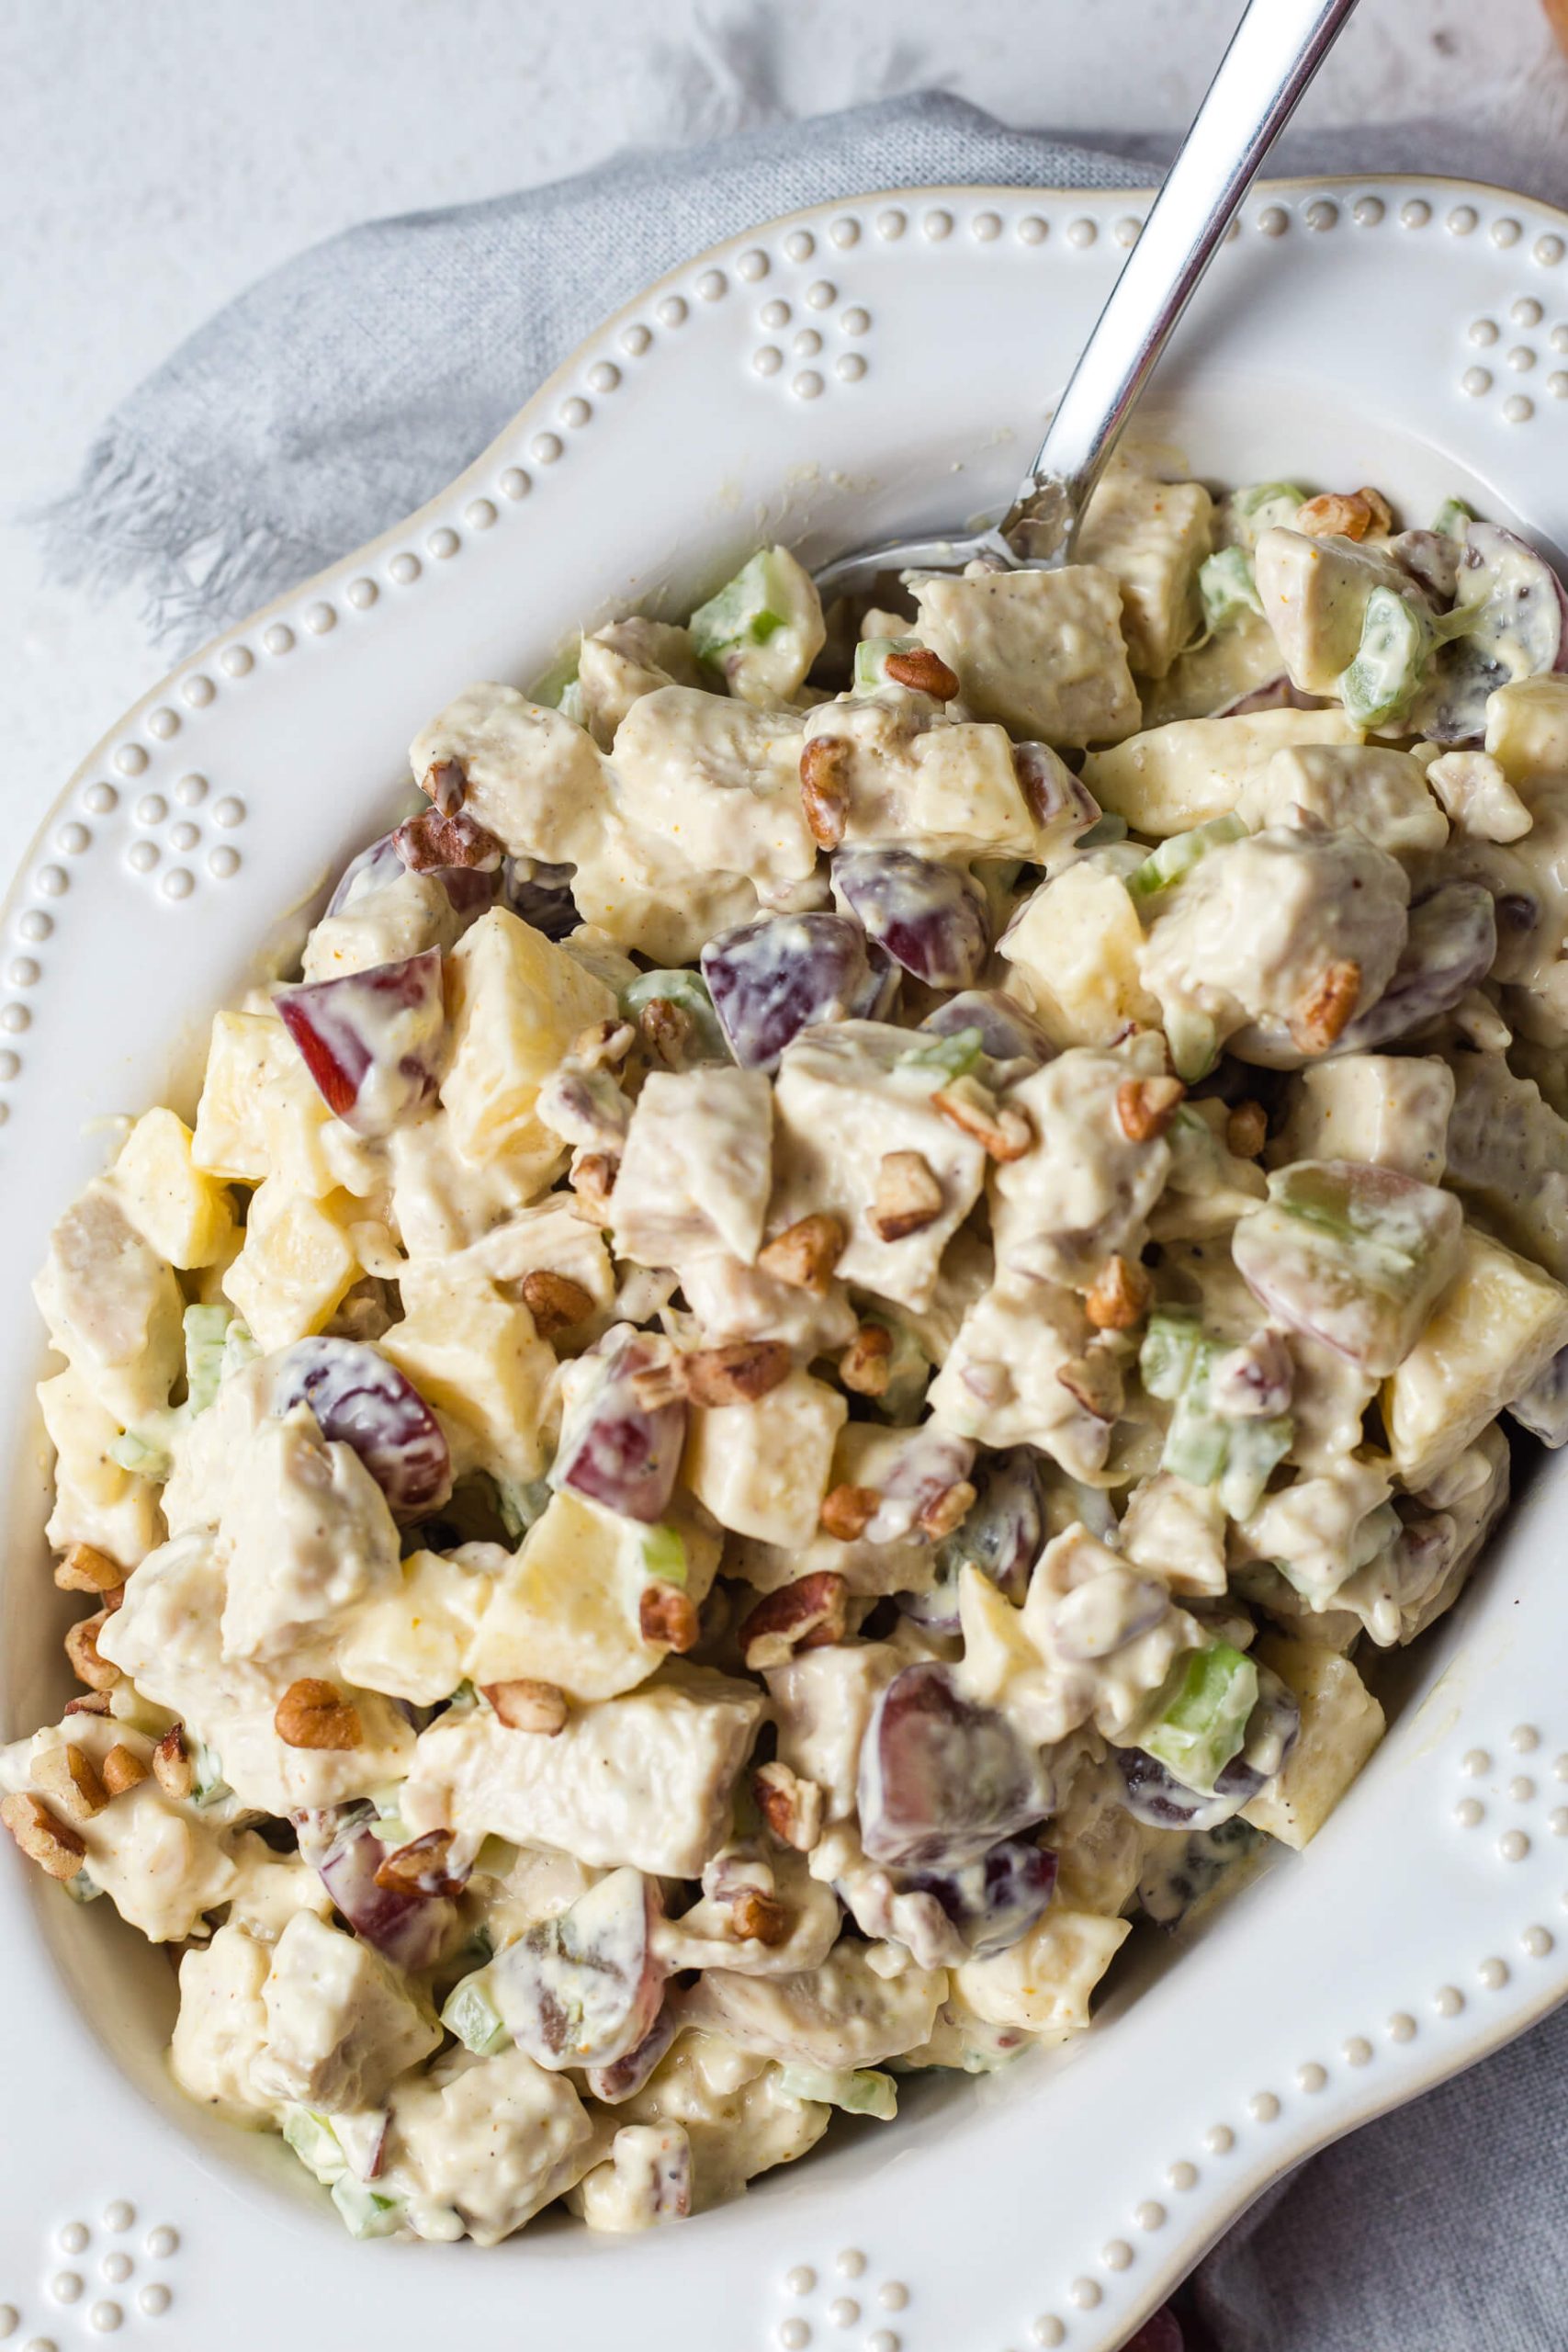 Southern chicken salad with grapes and pecans in a decorative white bowl with a serving spoon on a table.